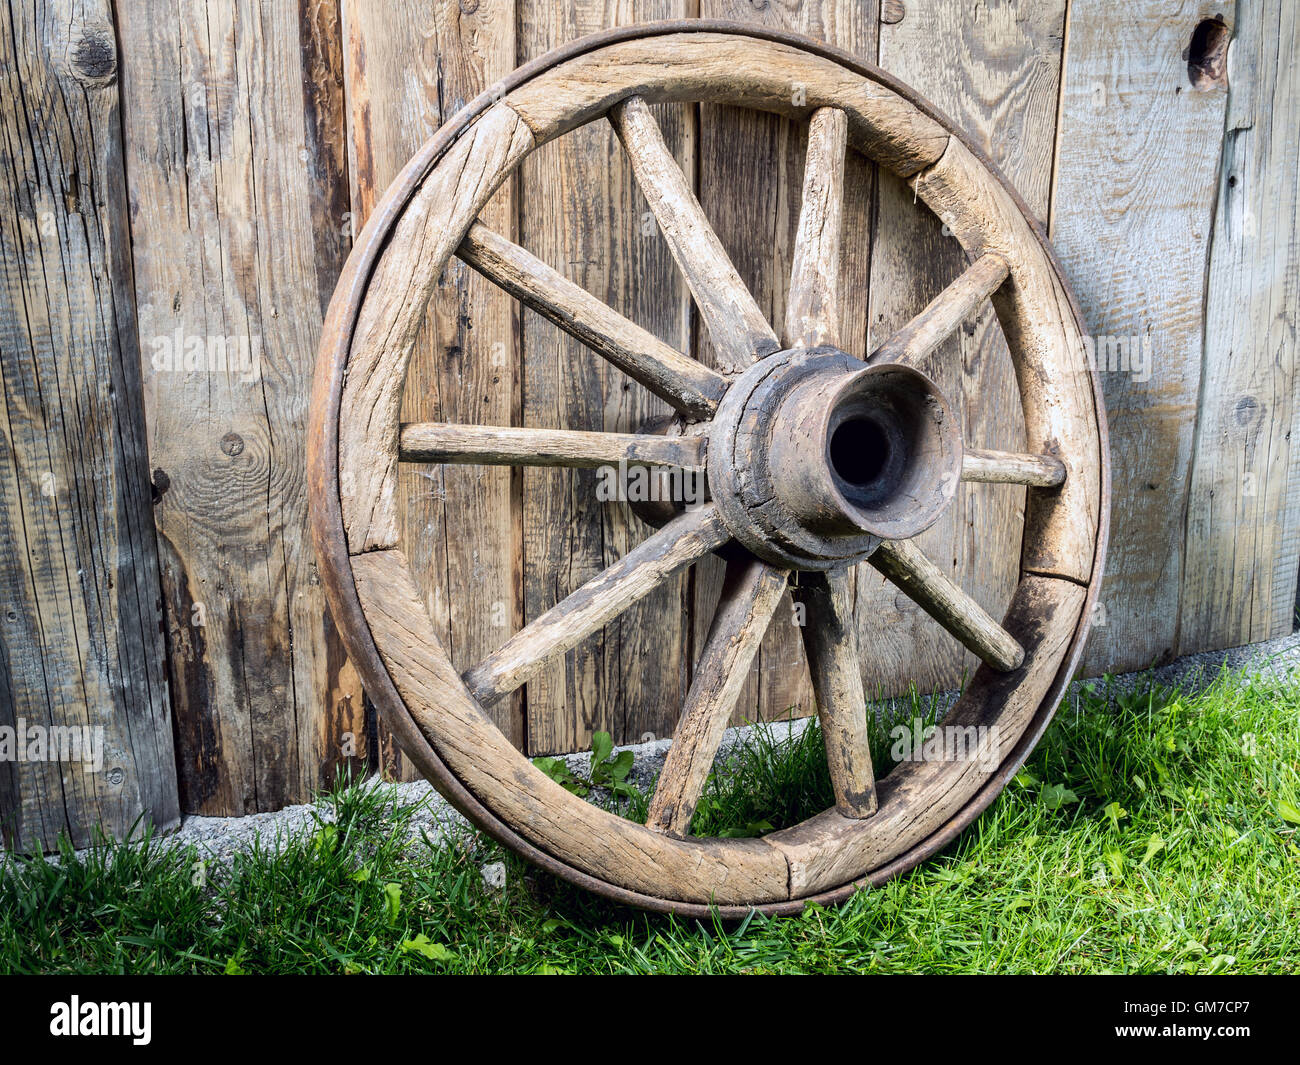 Old wooden wagon wheel resting against rustic wooden fence Stock Photo